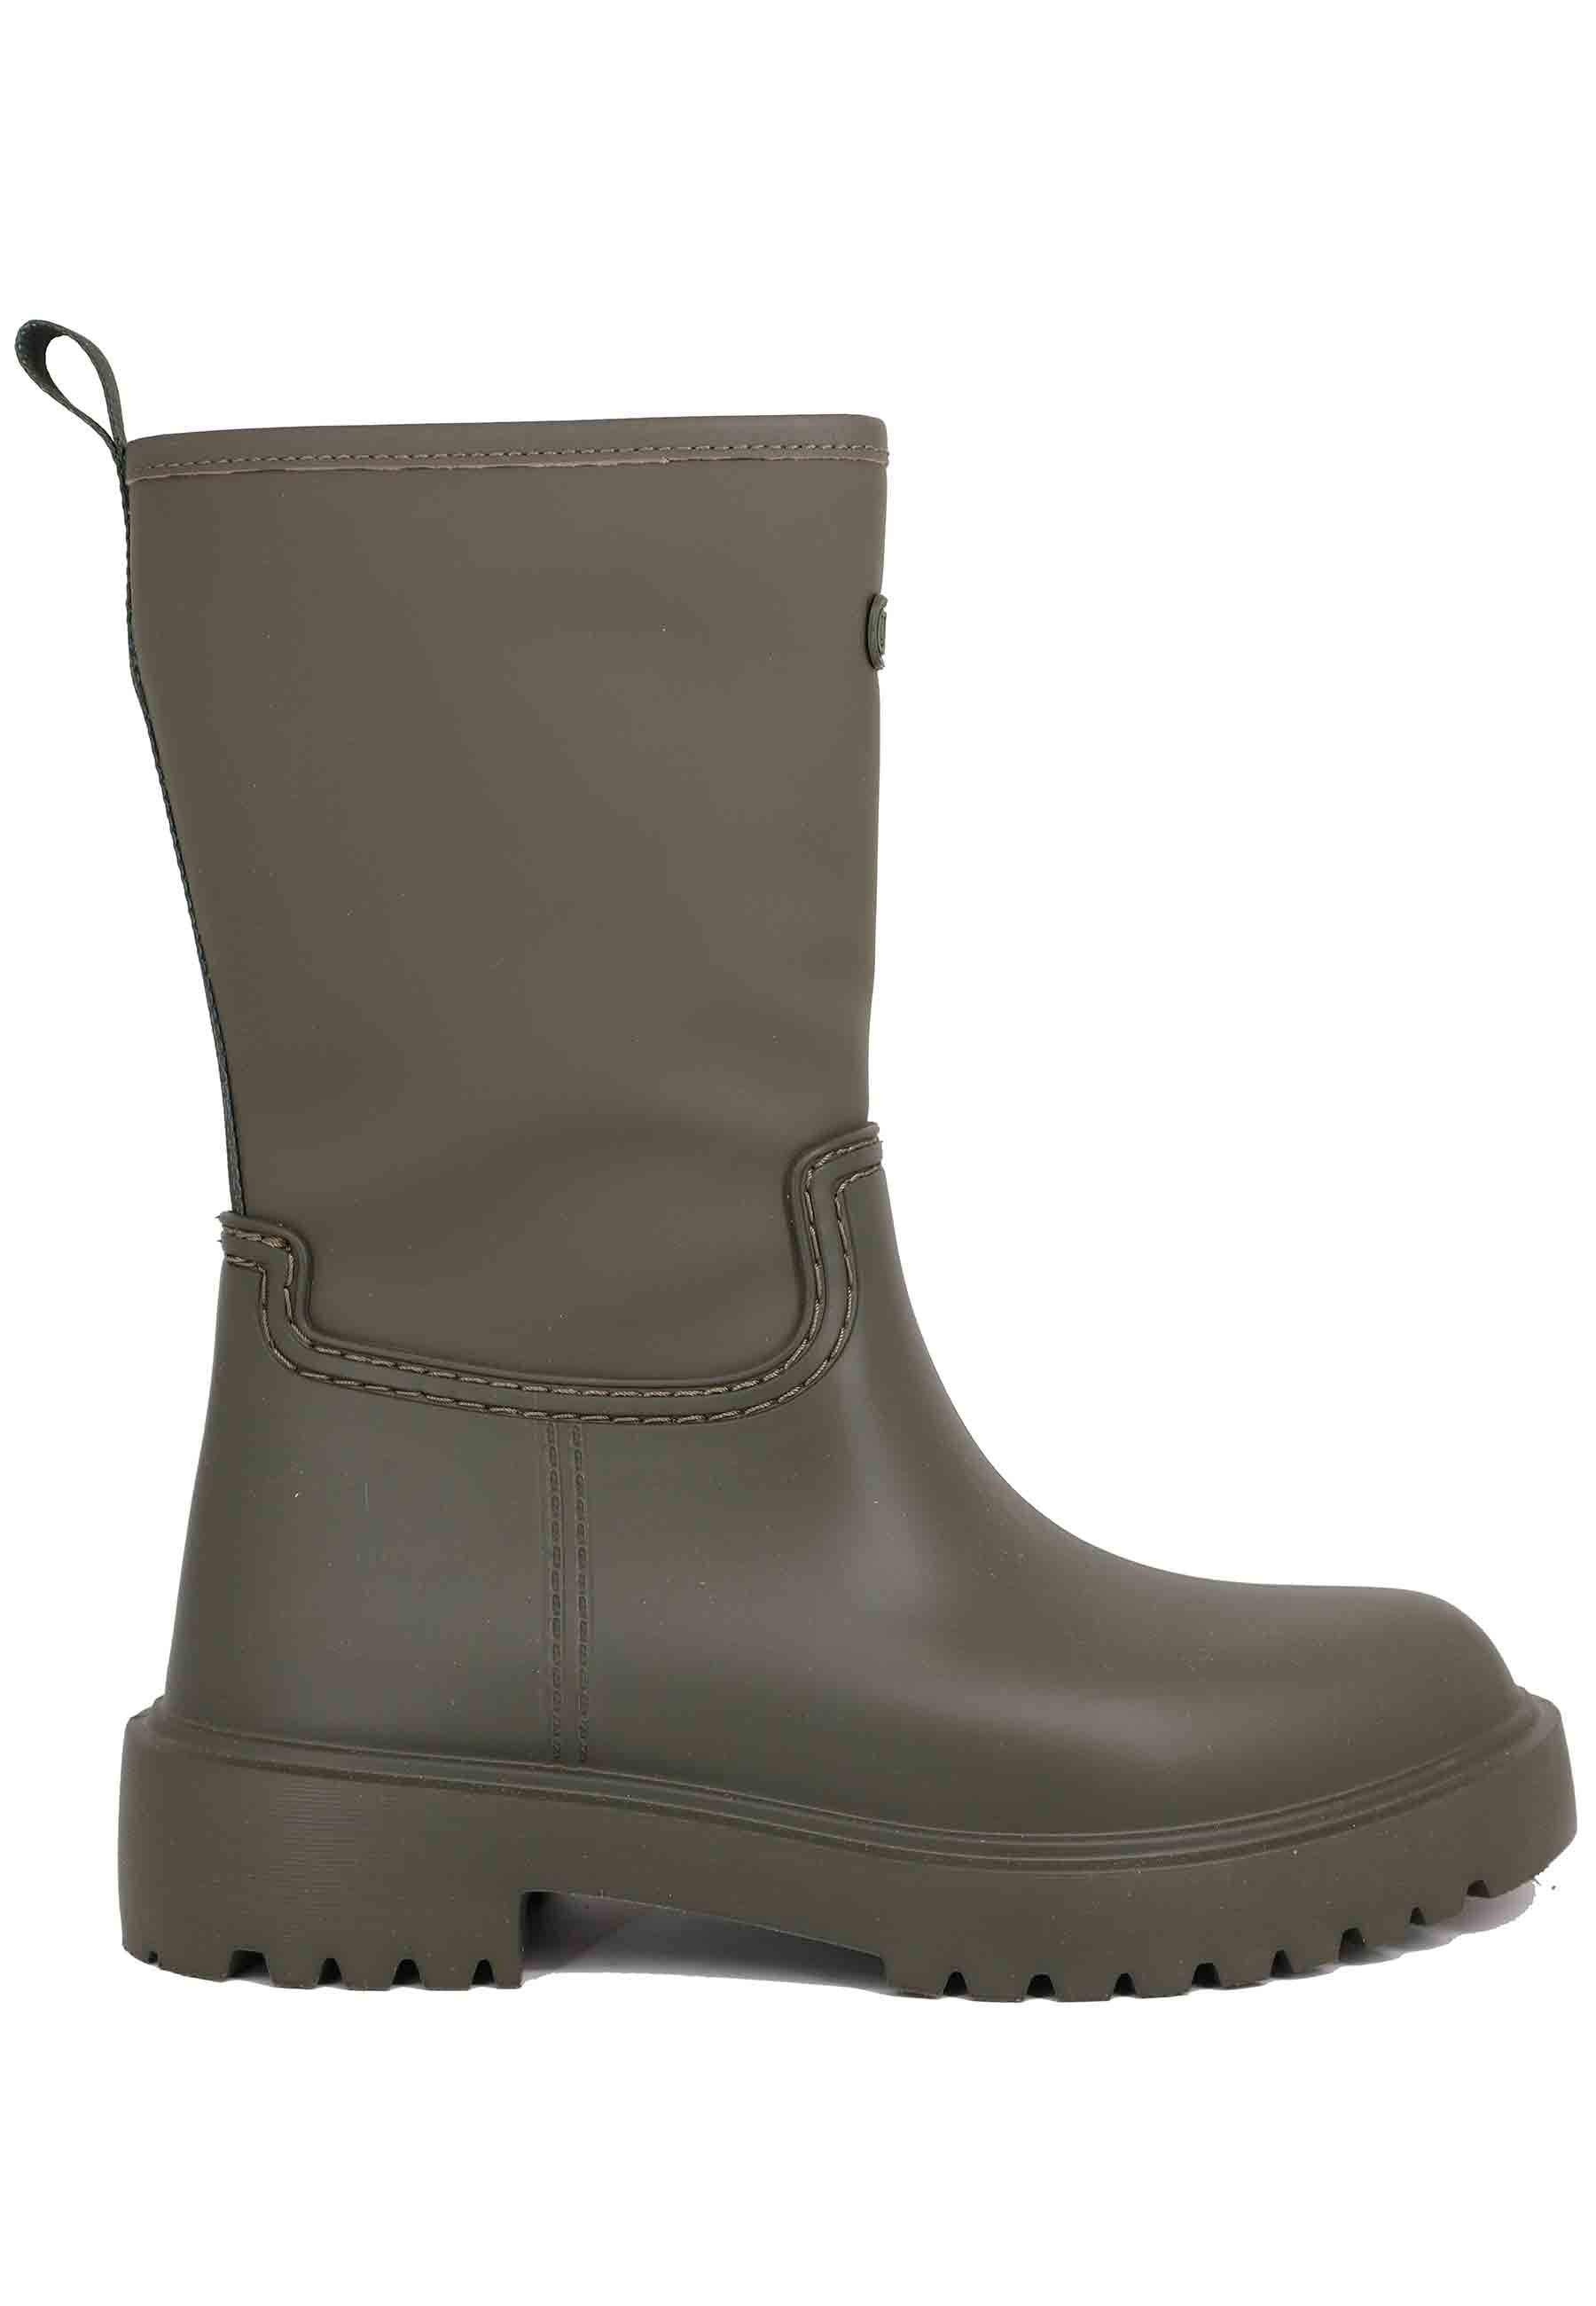 Women's rain boots in PVC and green fabric